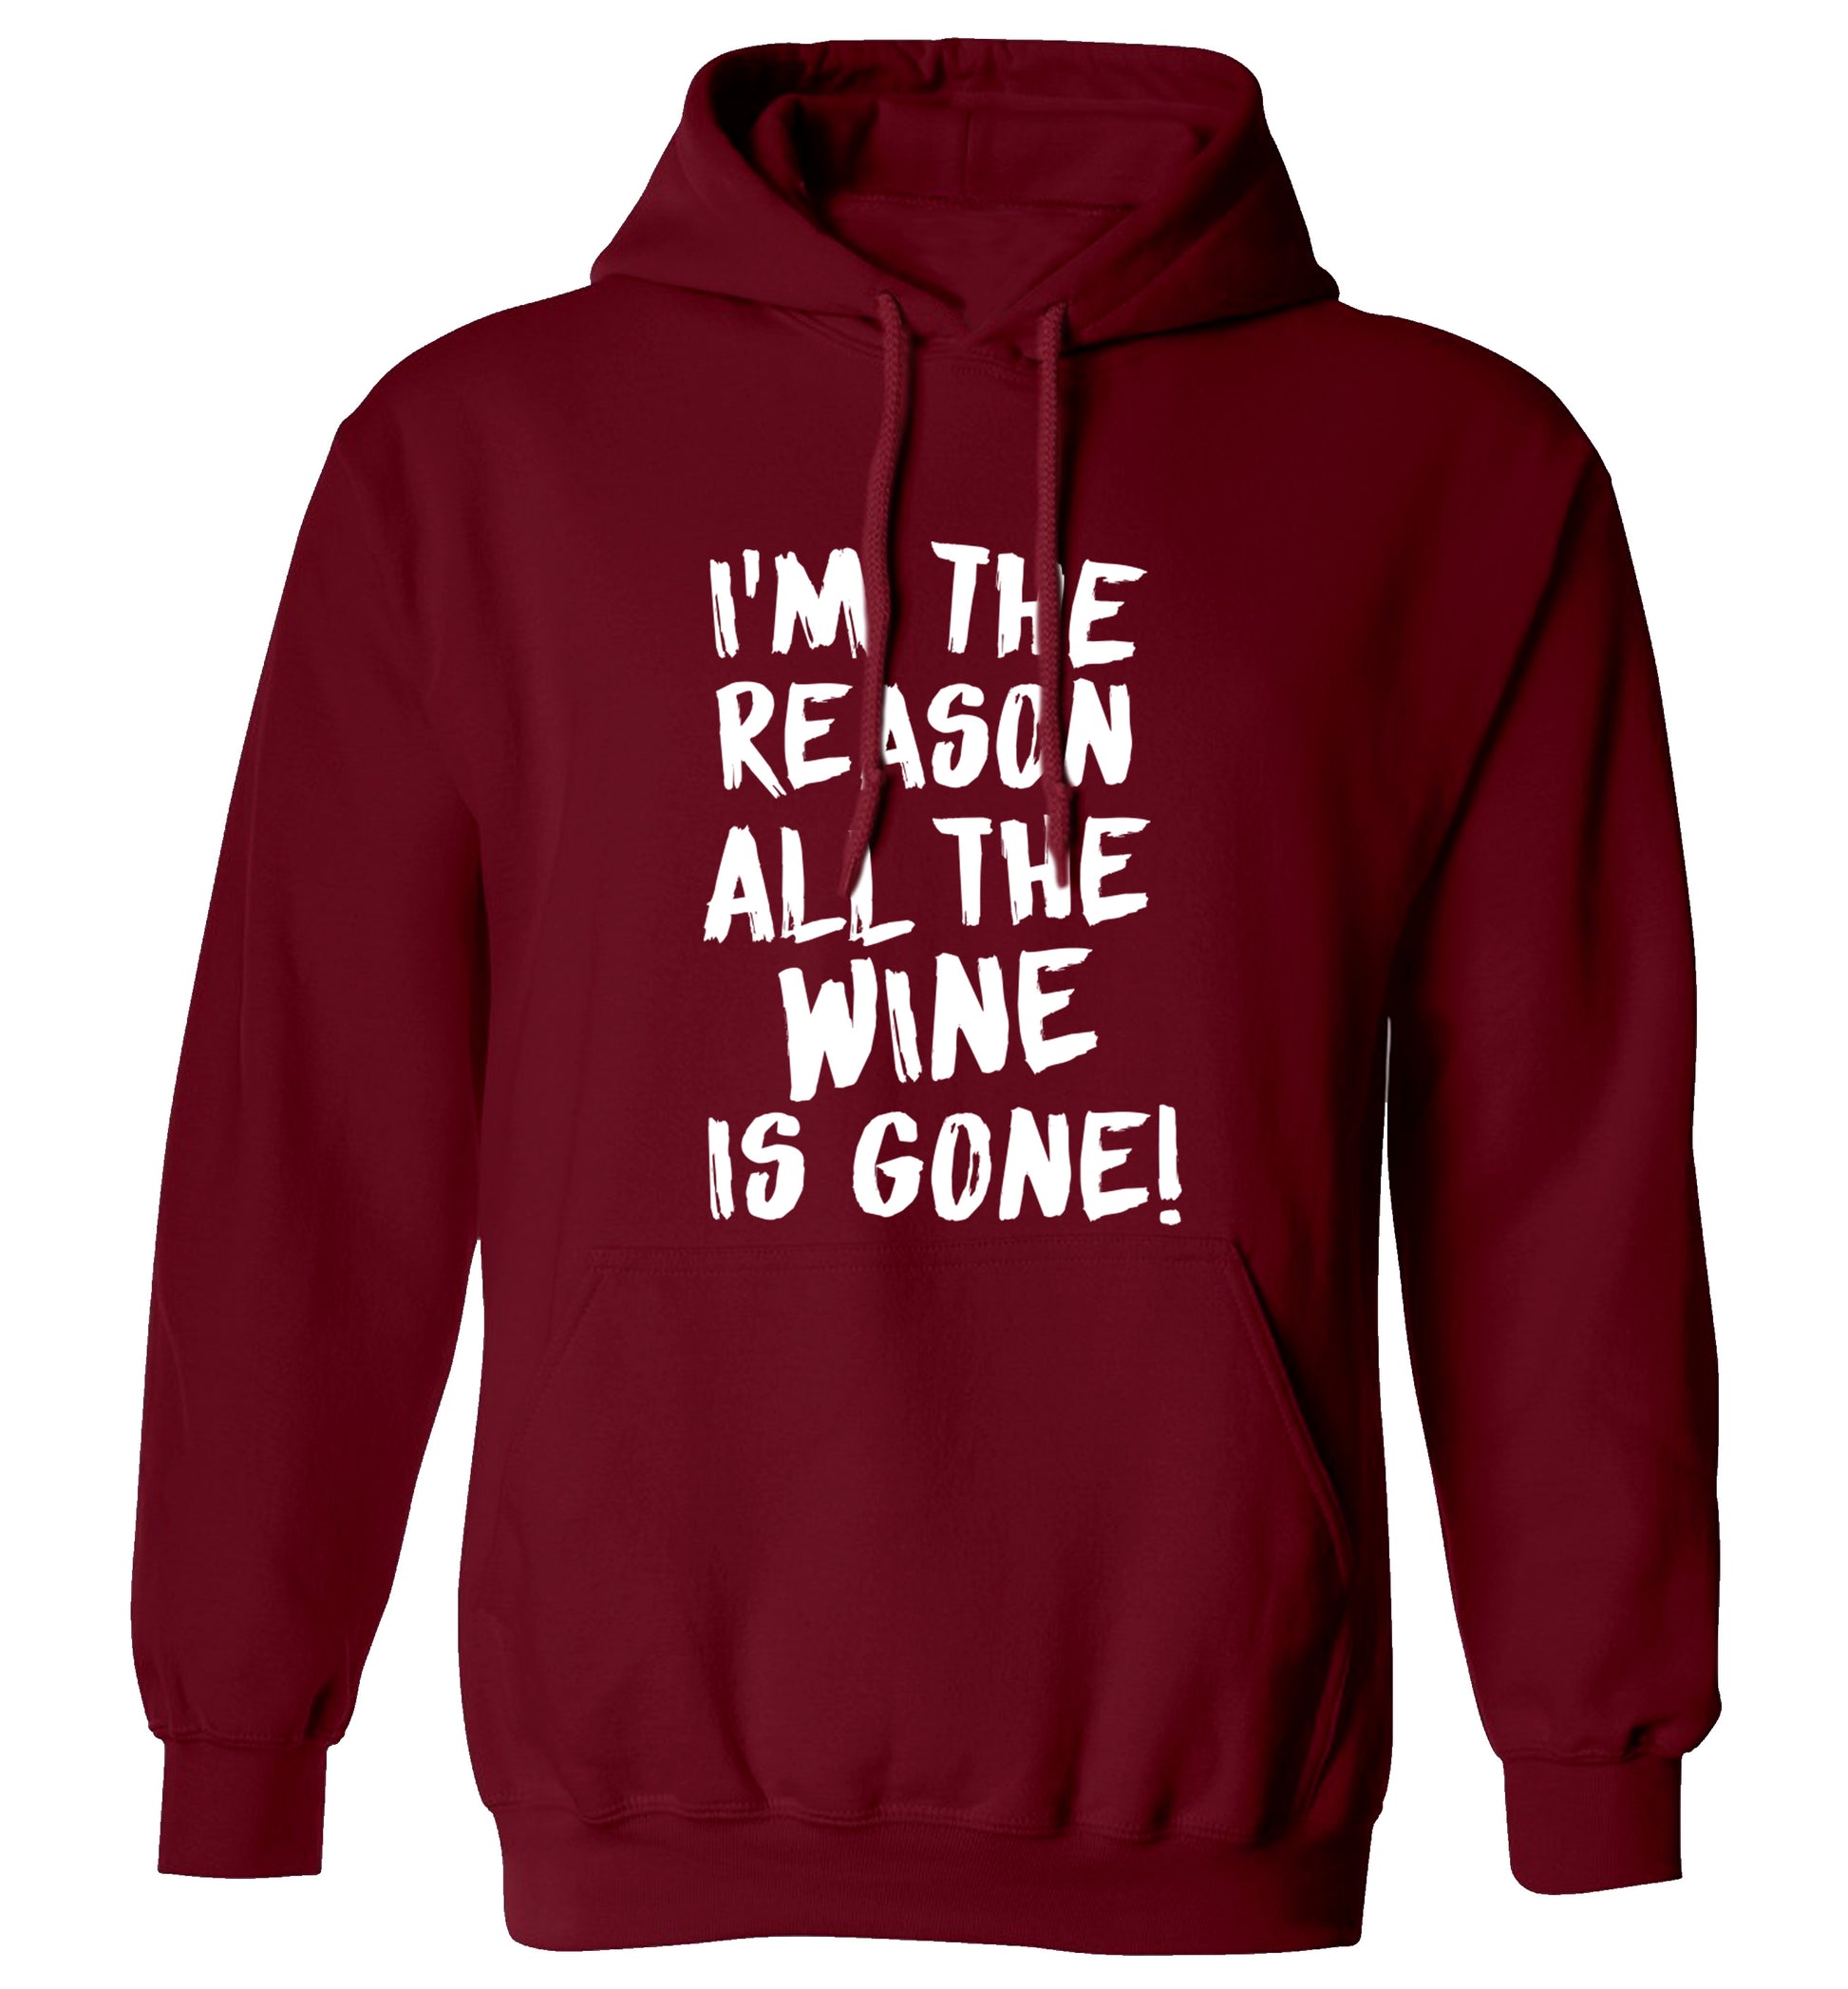 I'm the reason all the wine is gone adults unisex maroon hoodie 2XL